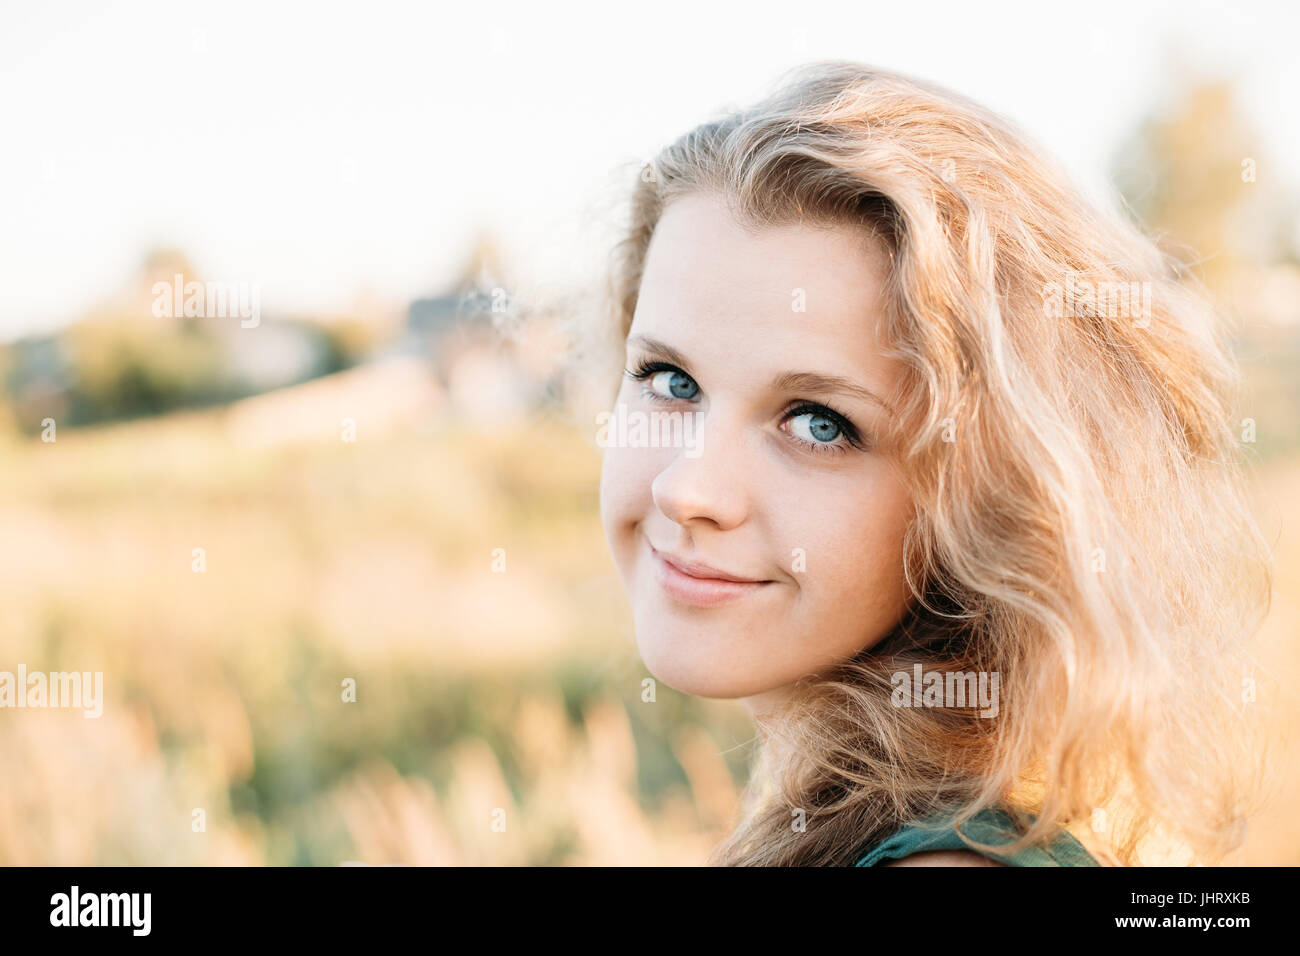 Portrait Of Young Pretty Plus Size Caucasian Happy Girl Woman With Blue Eyes, Wavy Brown Long Hair In Summer Meadow Background. Stock Photo